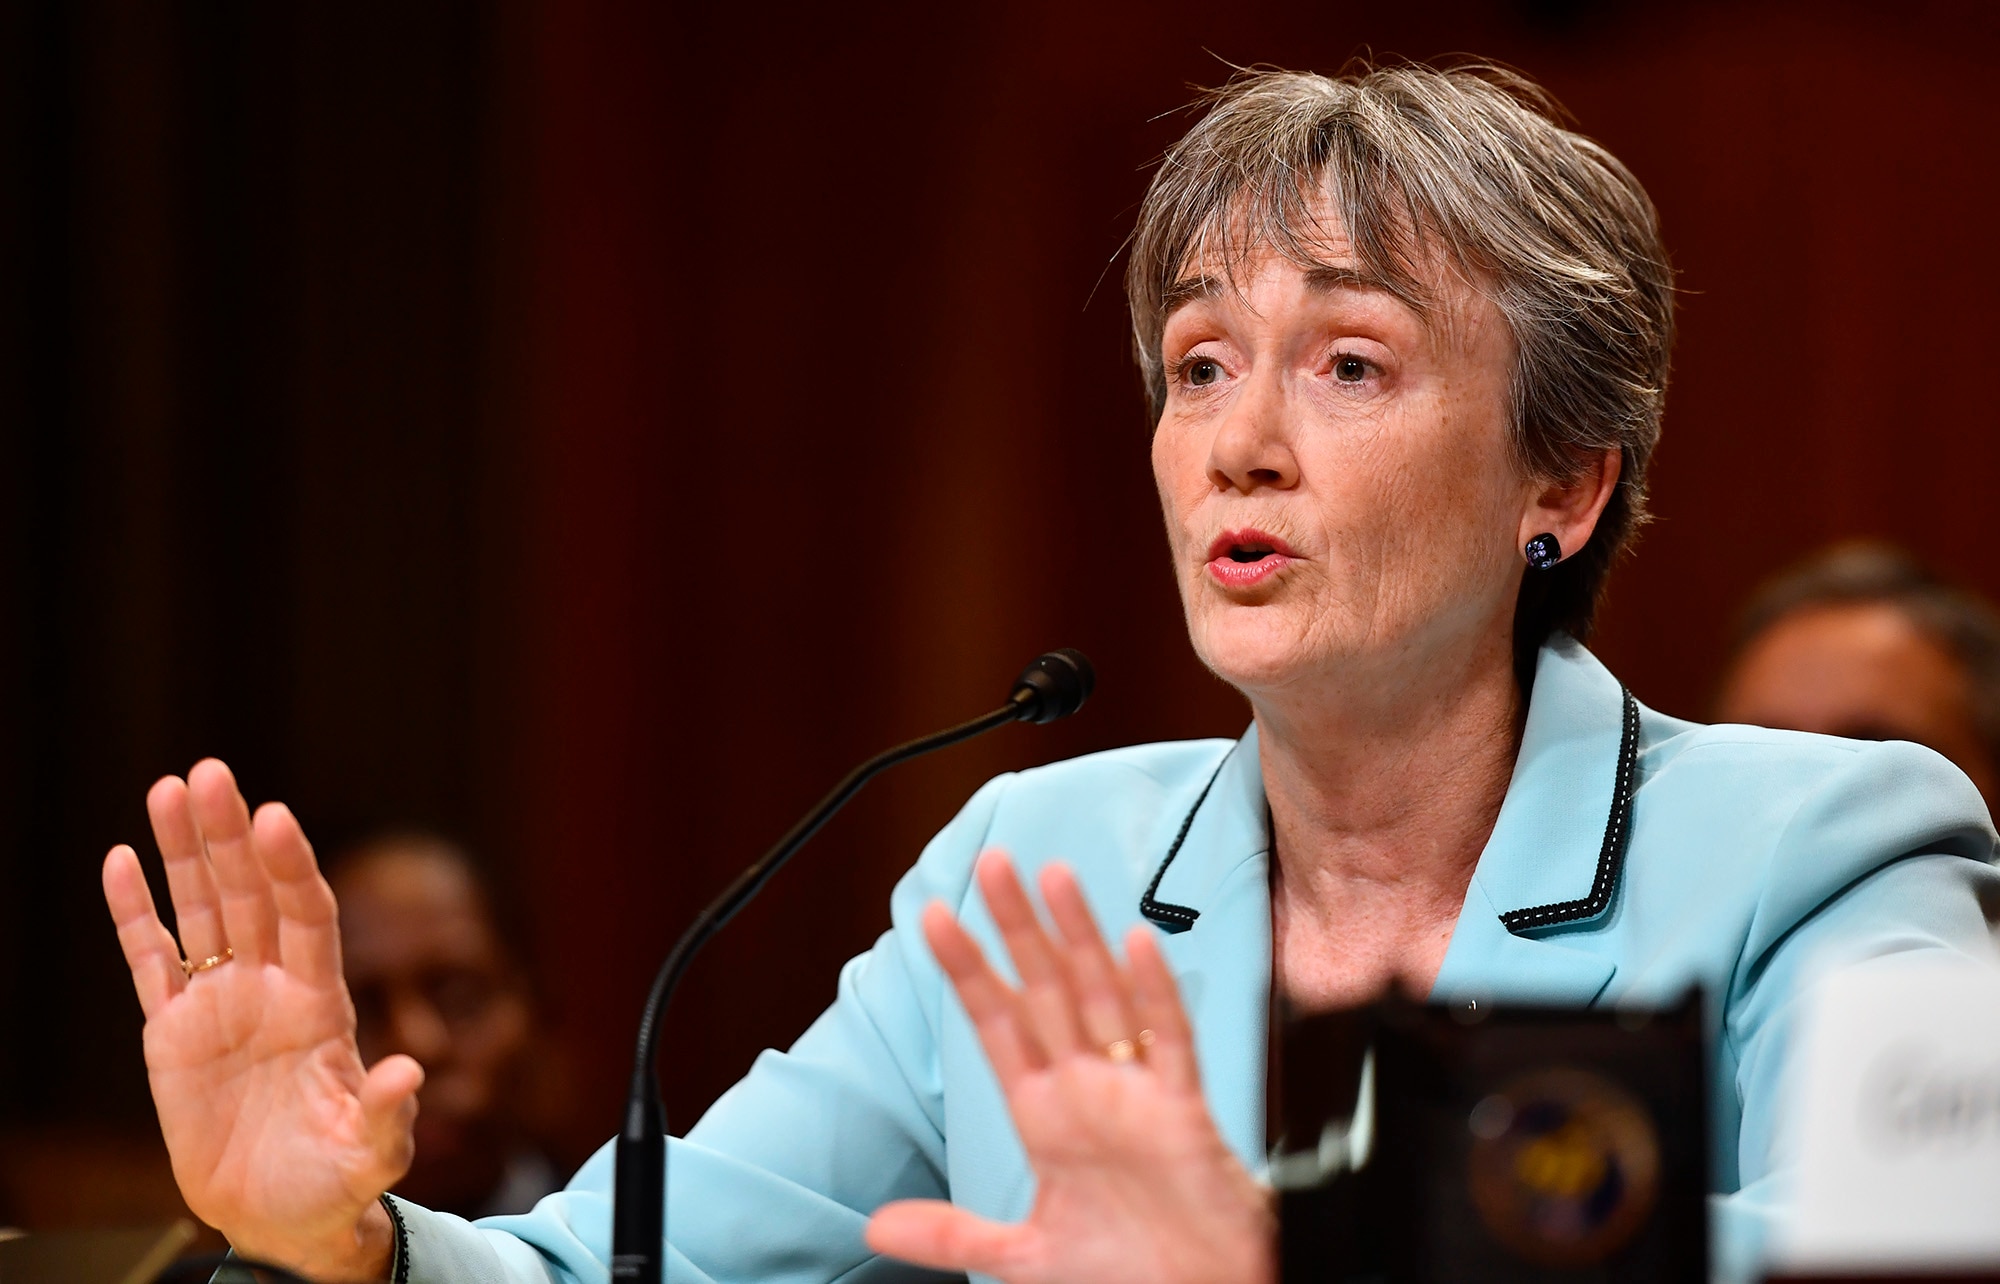 Secretary of the Air Force Heather Wilson testifies before the Senate Appropriations Committee for Defense June 21, 2017, in Washington, D.C. Air Force Chief of Staff Gen. David Goldfein joined Wilson before the subcommittee's hearing to discuss the fiscal year 2018 budget request for the Air Force. (U.S. Air Force photo/Scott M. Ash)